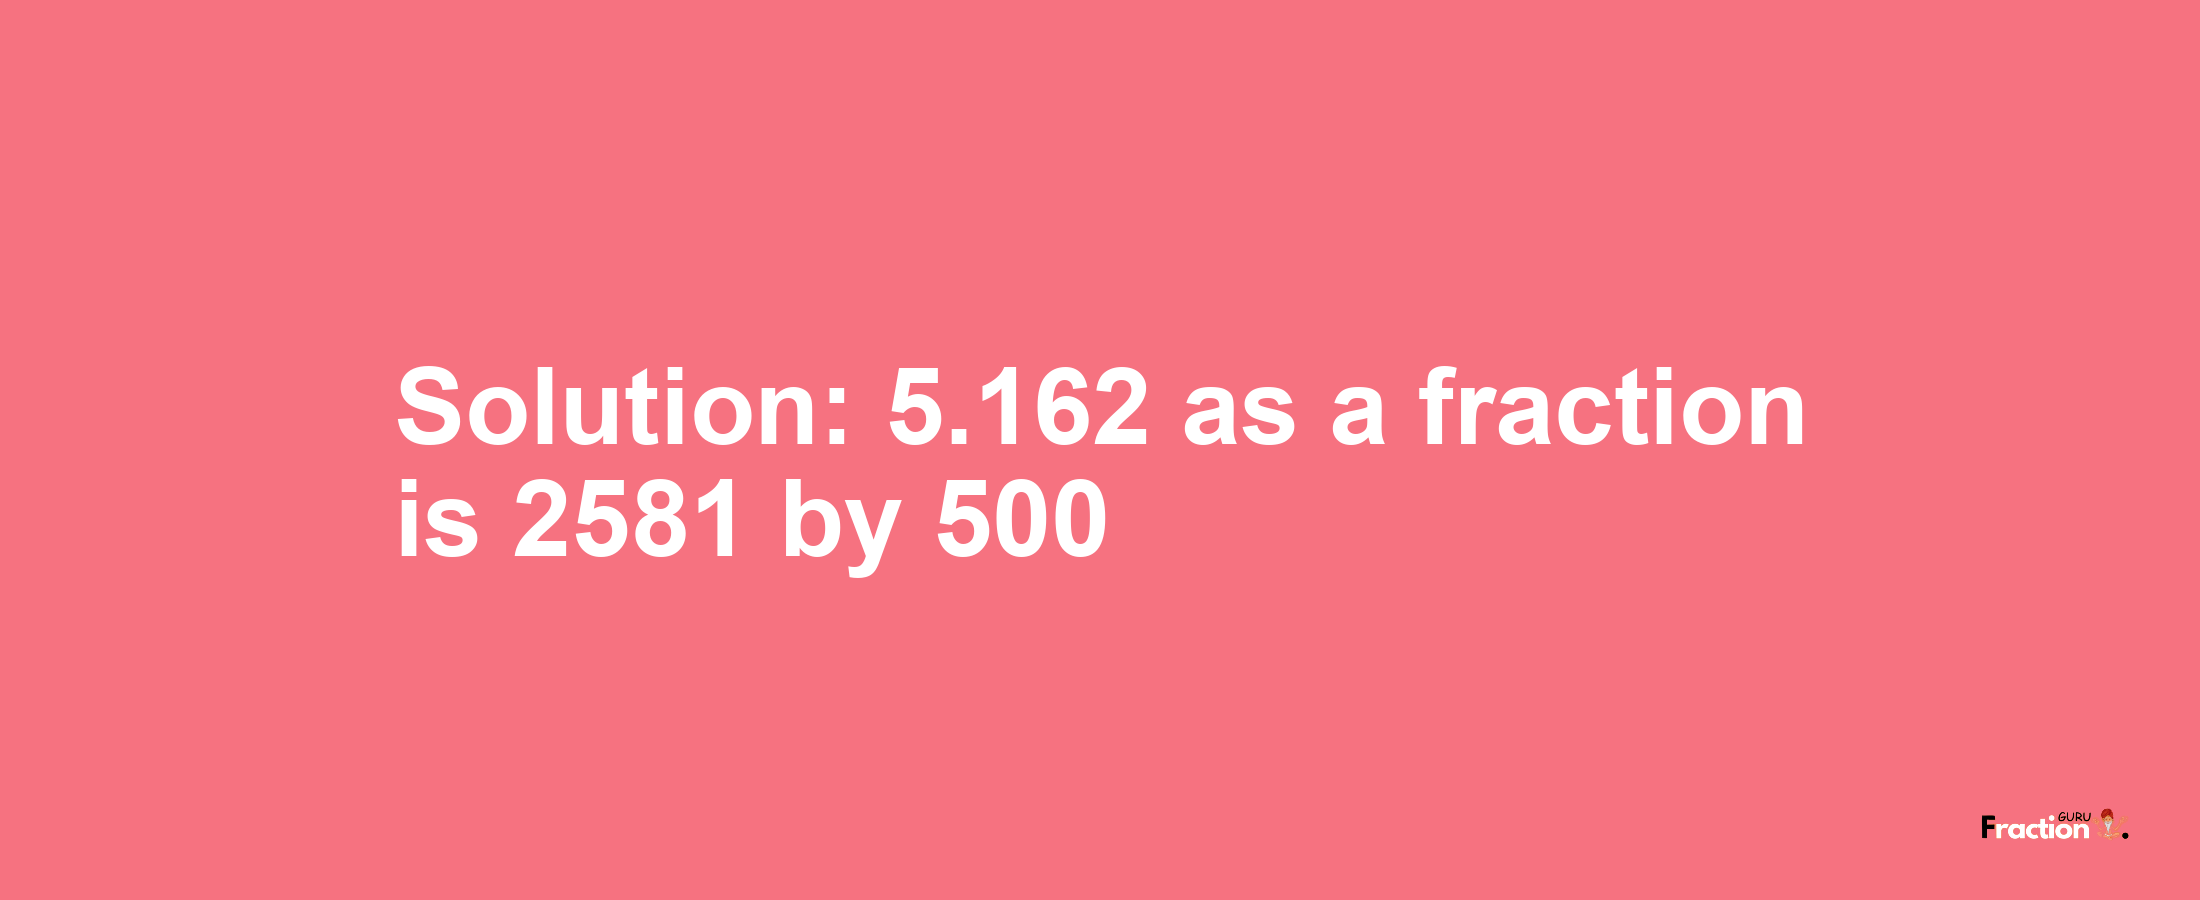 Solution:5.162 as a fraction is 2581/500